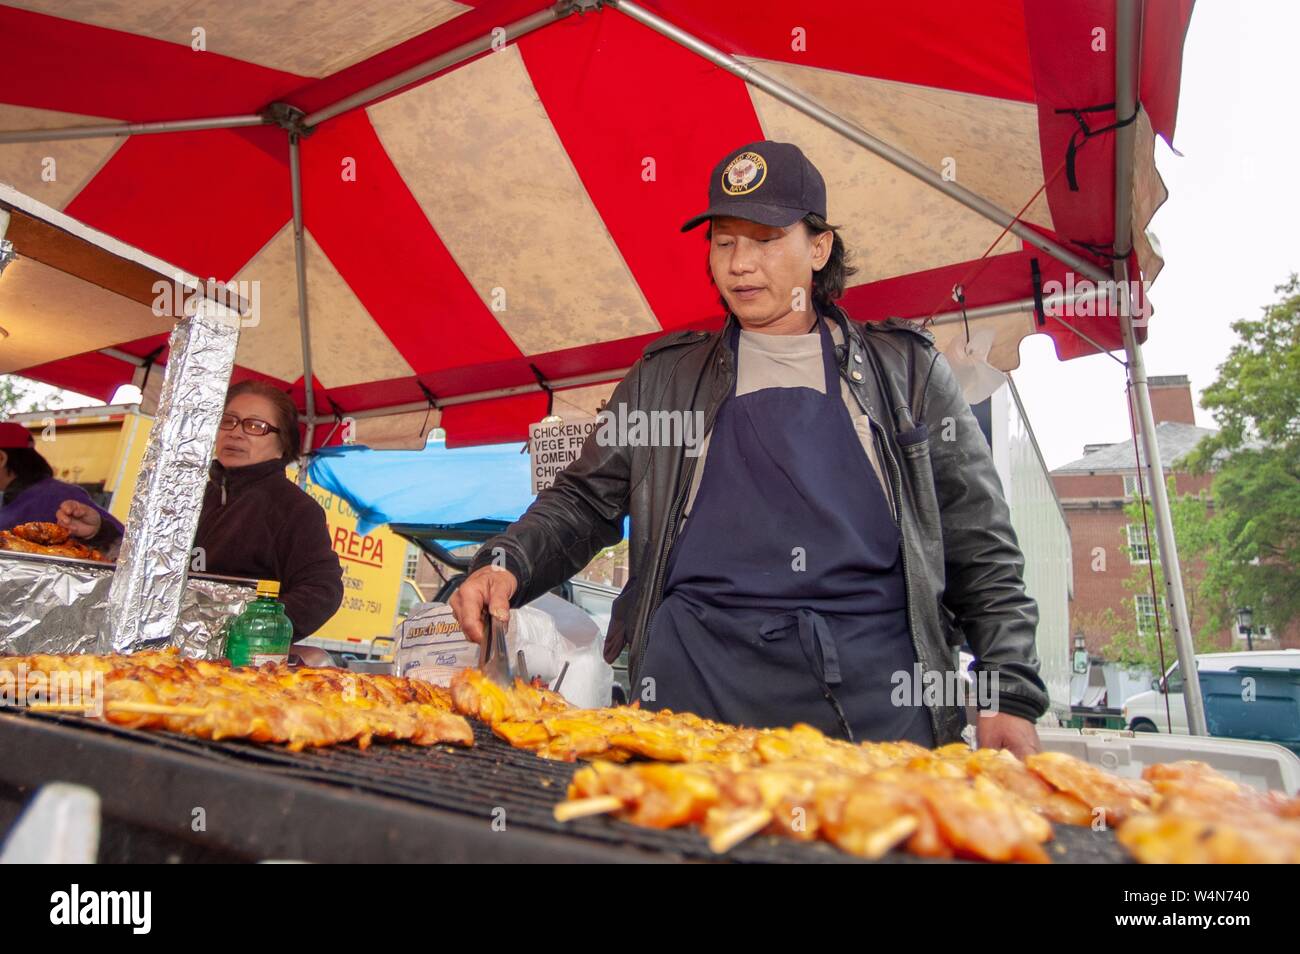 A vendor cooks chicken on a large outdoor grill during the Spring Fair carnival at the Homewood Campus of the Johns Hopkins University in Baltimore, Maryland, April 22, 2006. From the Homewood Photography collection. () Stock Photo